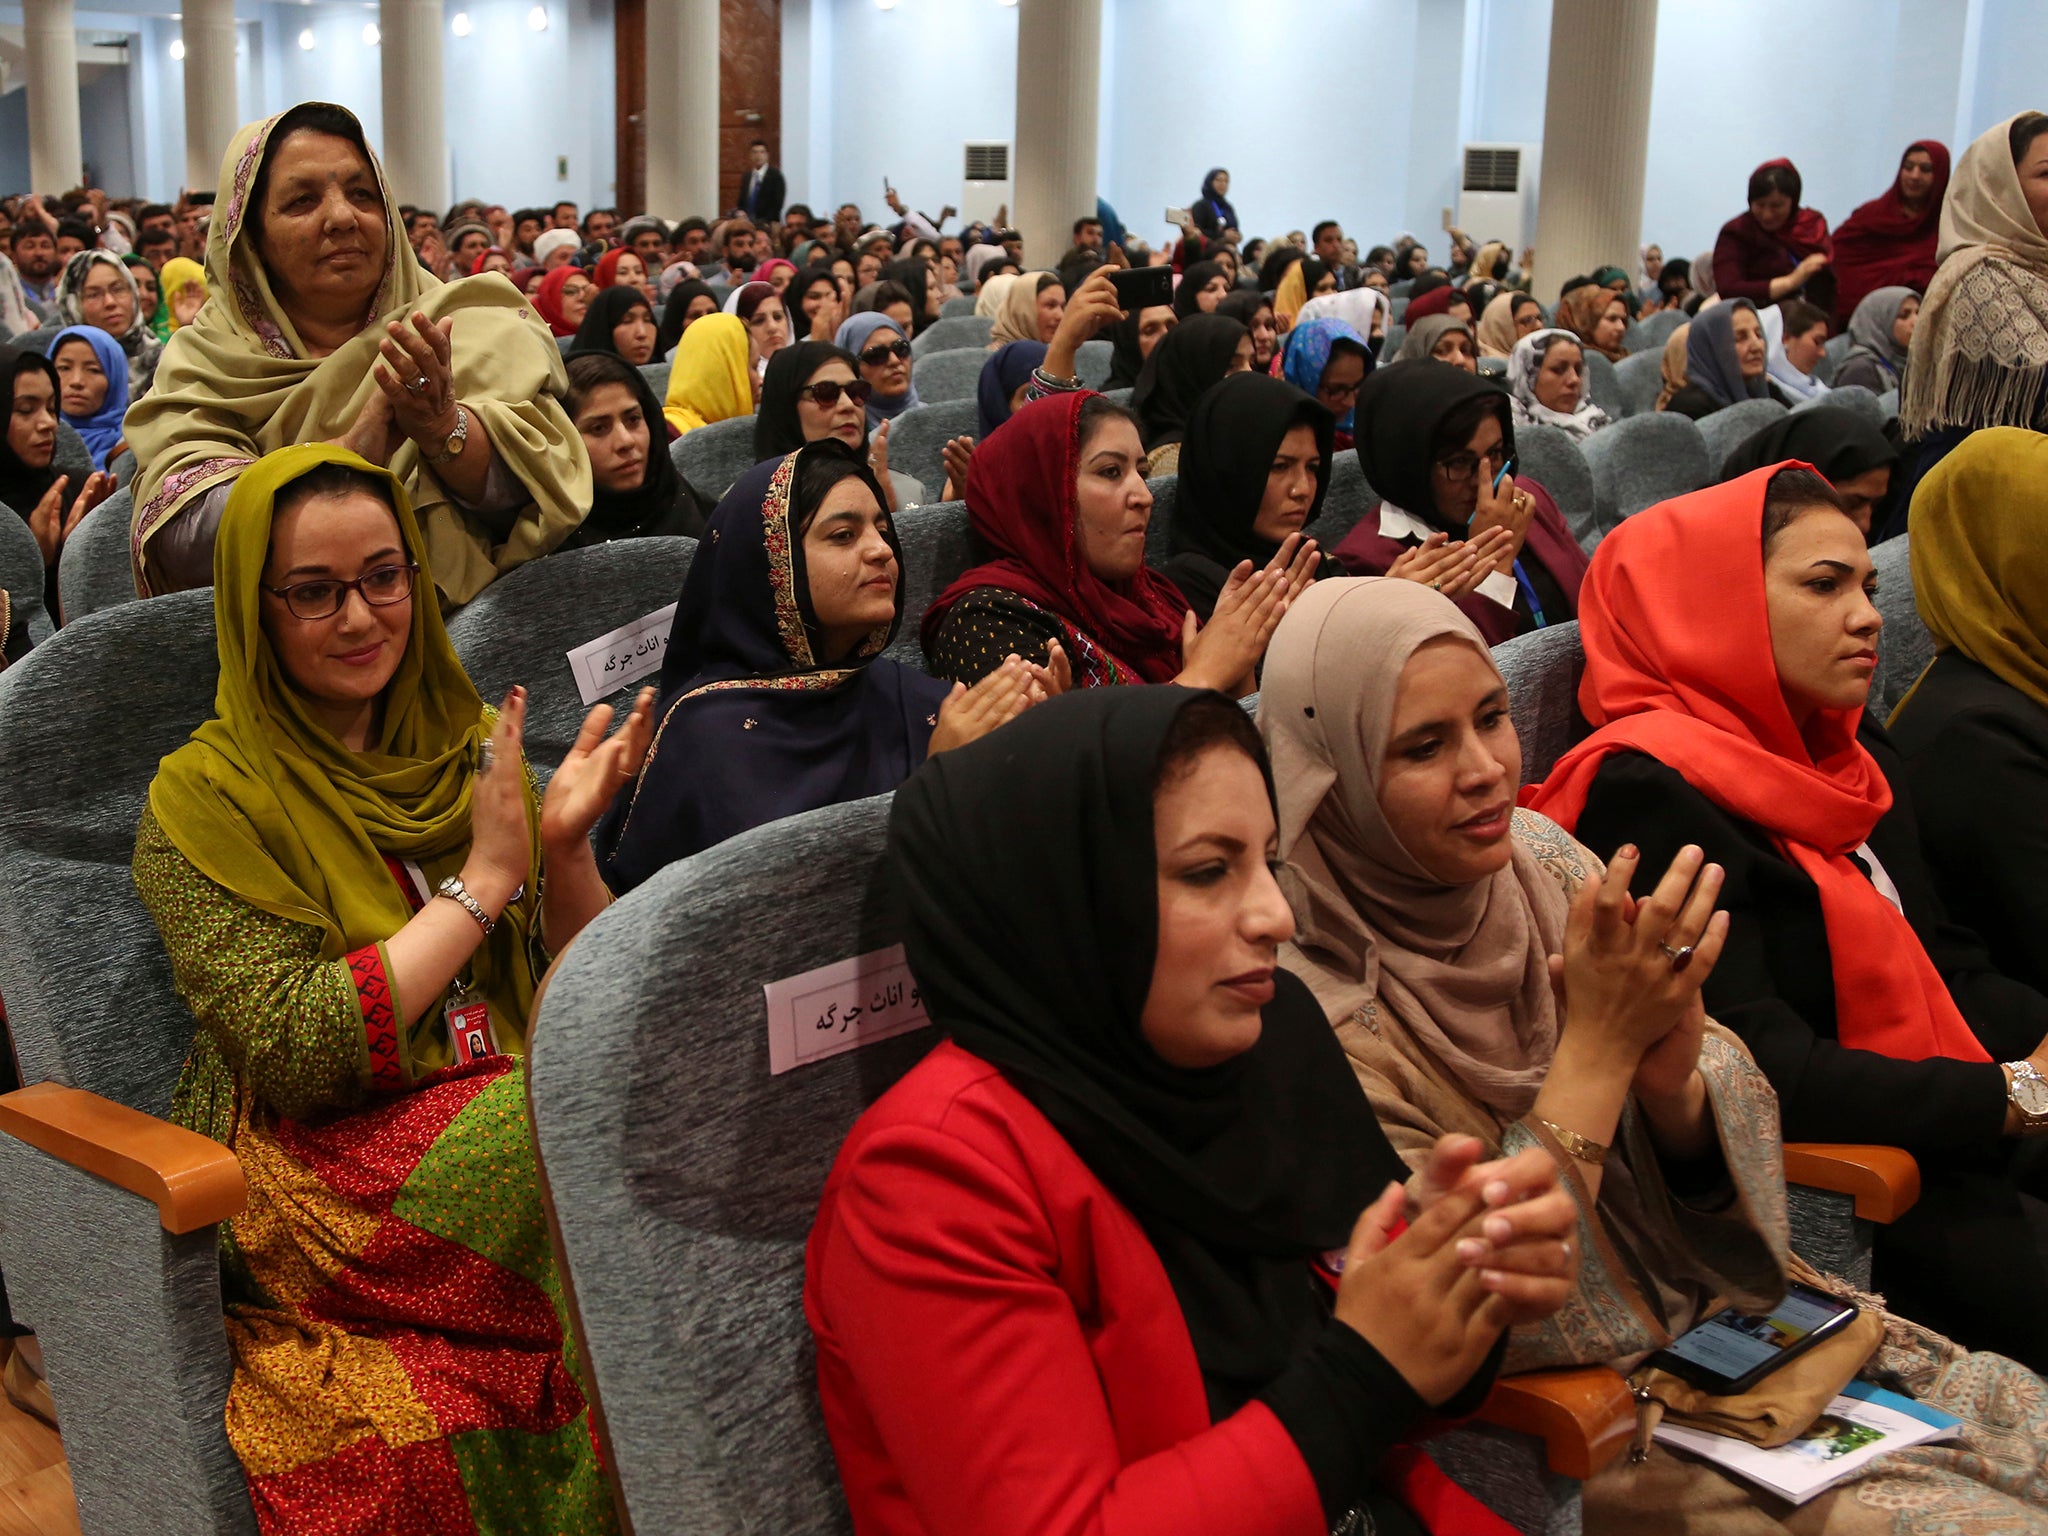 Around 30 per cent of the 3,200 delegates attending the Afghan grand assembly were women, according to organisers